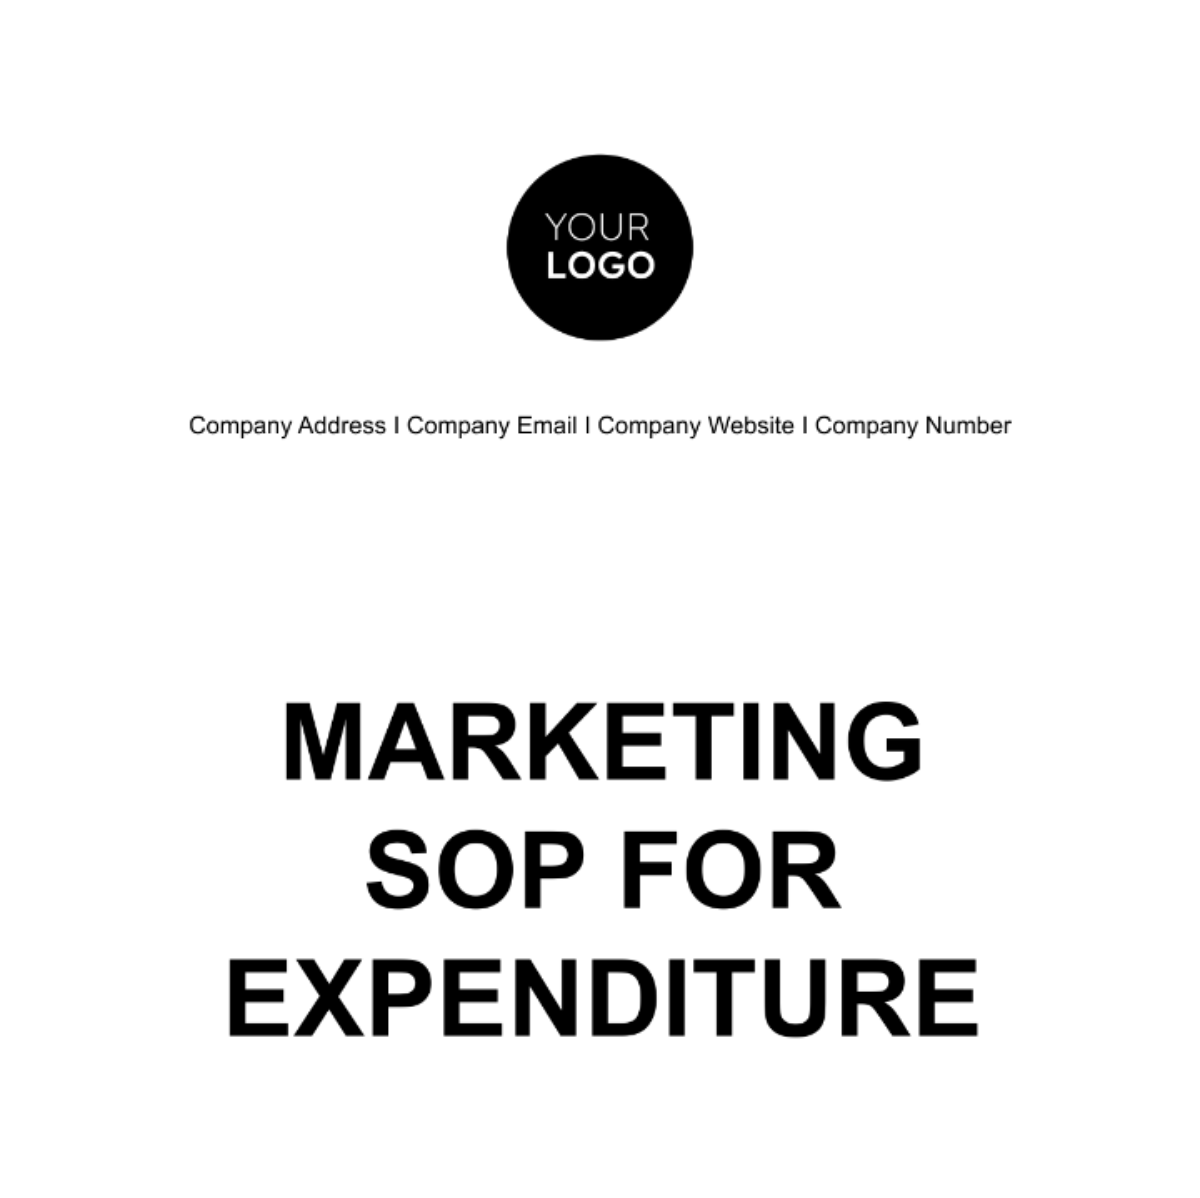 Free Marketing SOP for Expenditure Template